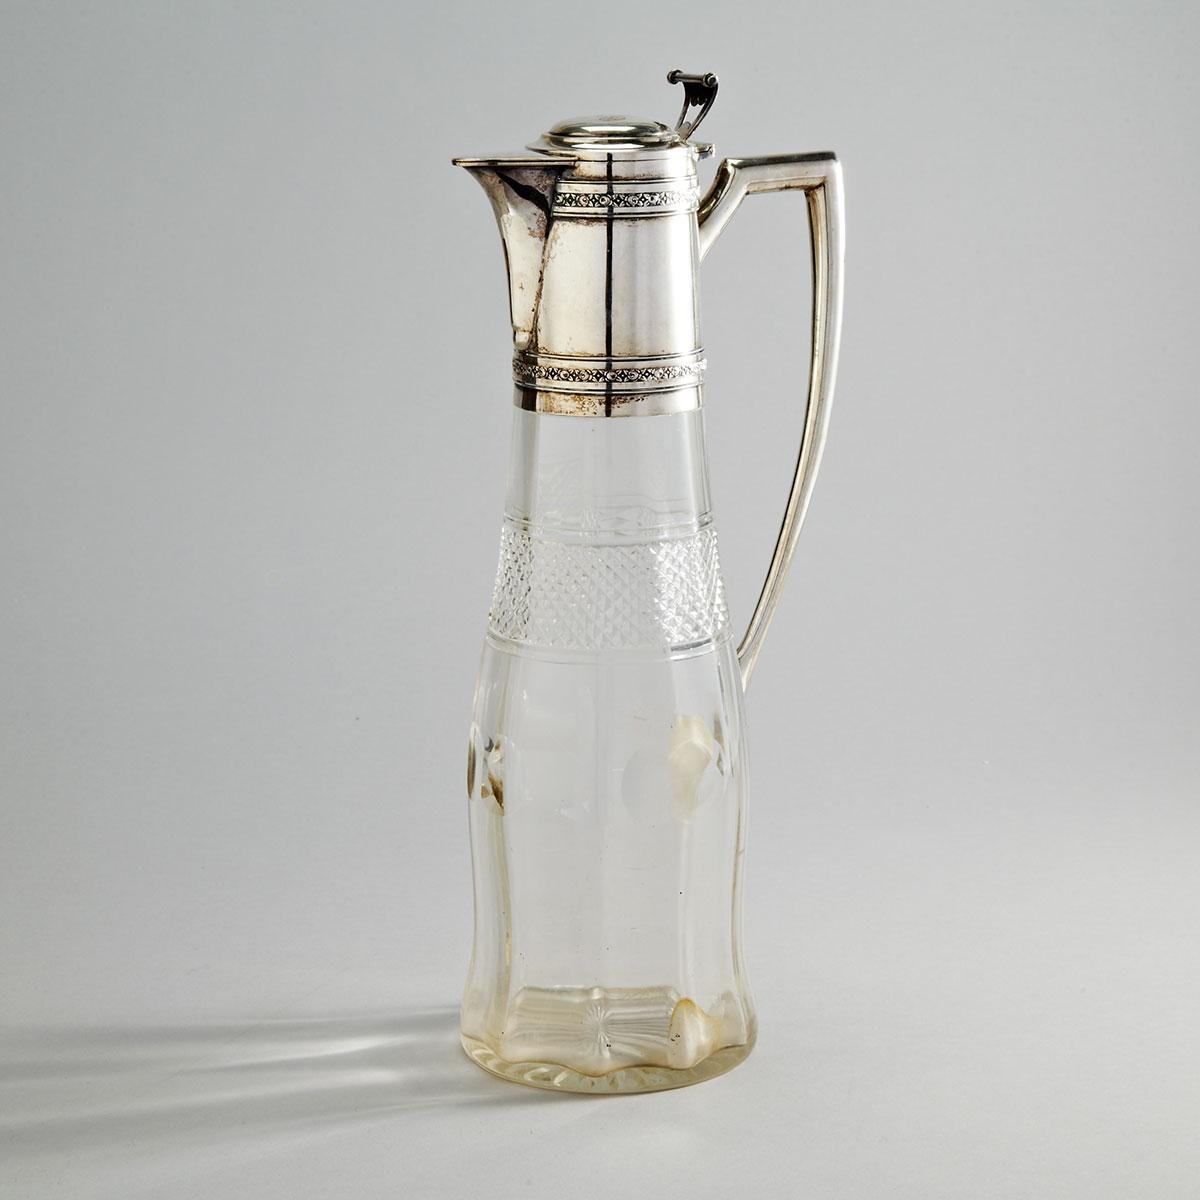 Austro-Hungarian Silver Mounted Cut Glass Claret Jug, Vienna, early 20th century